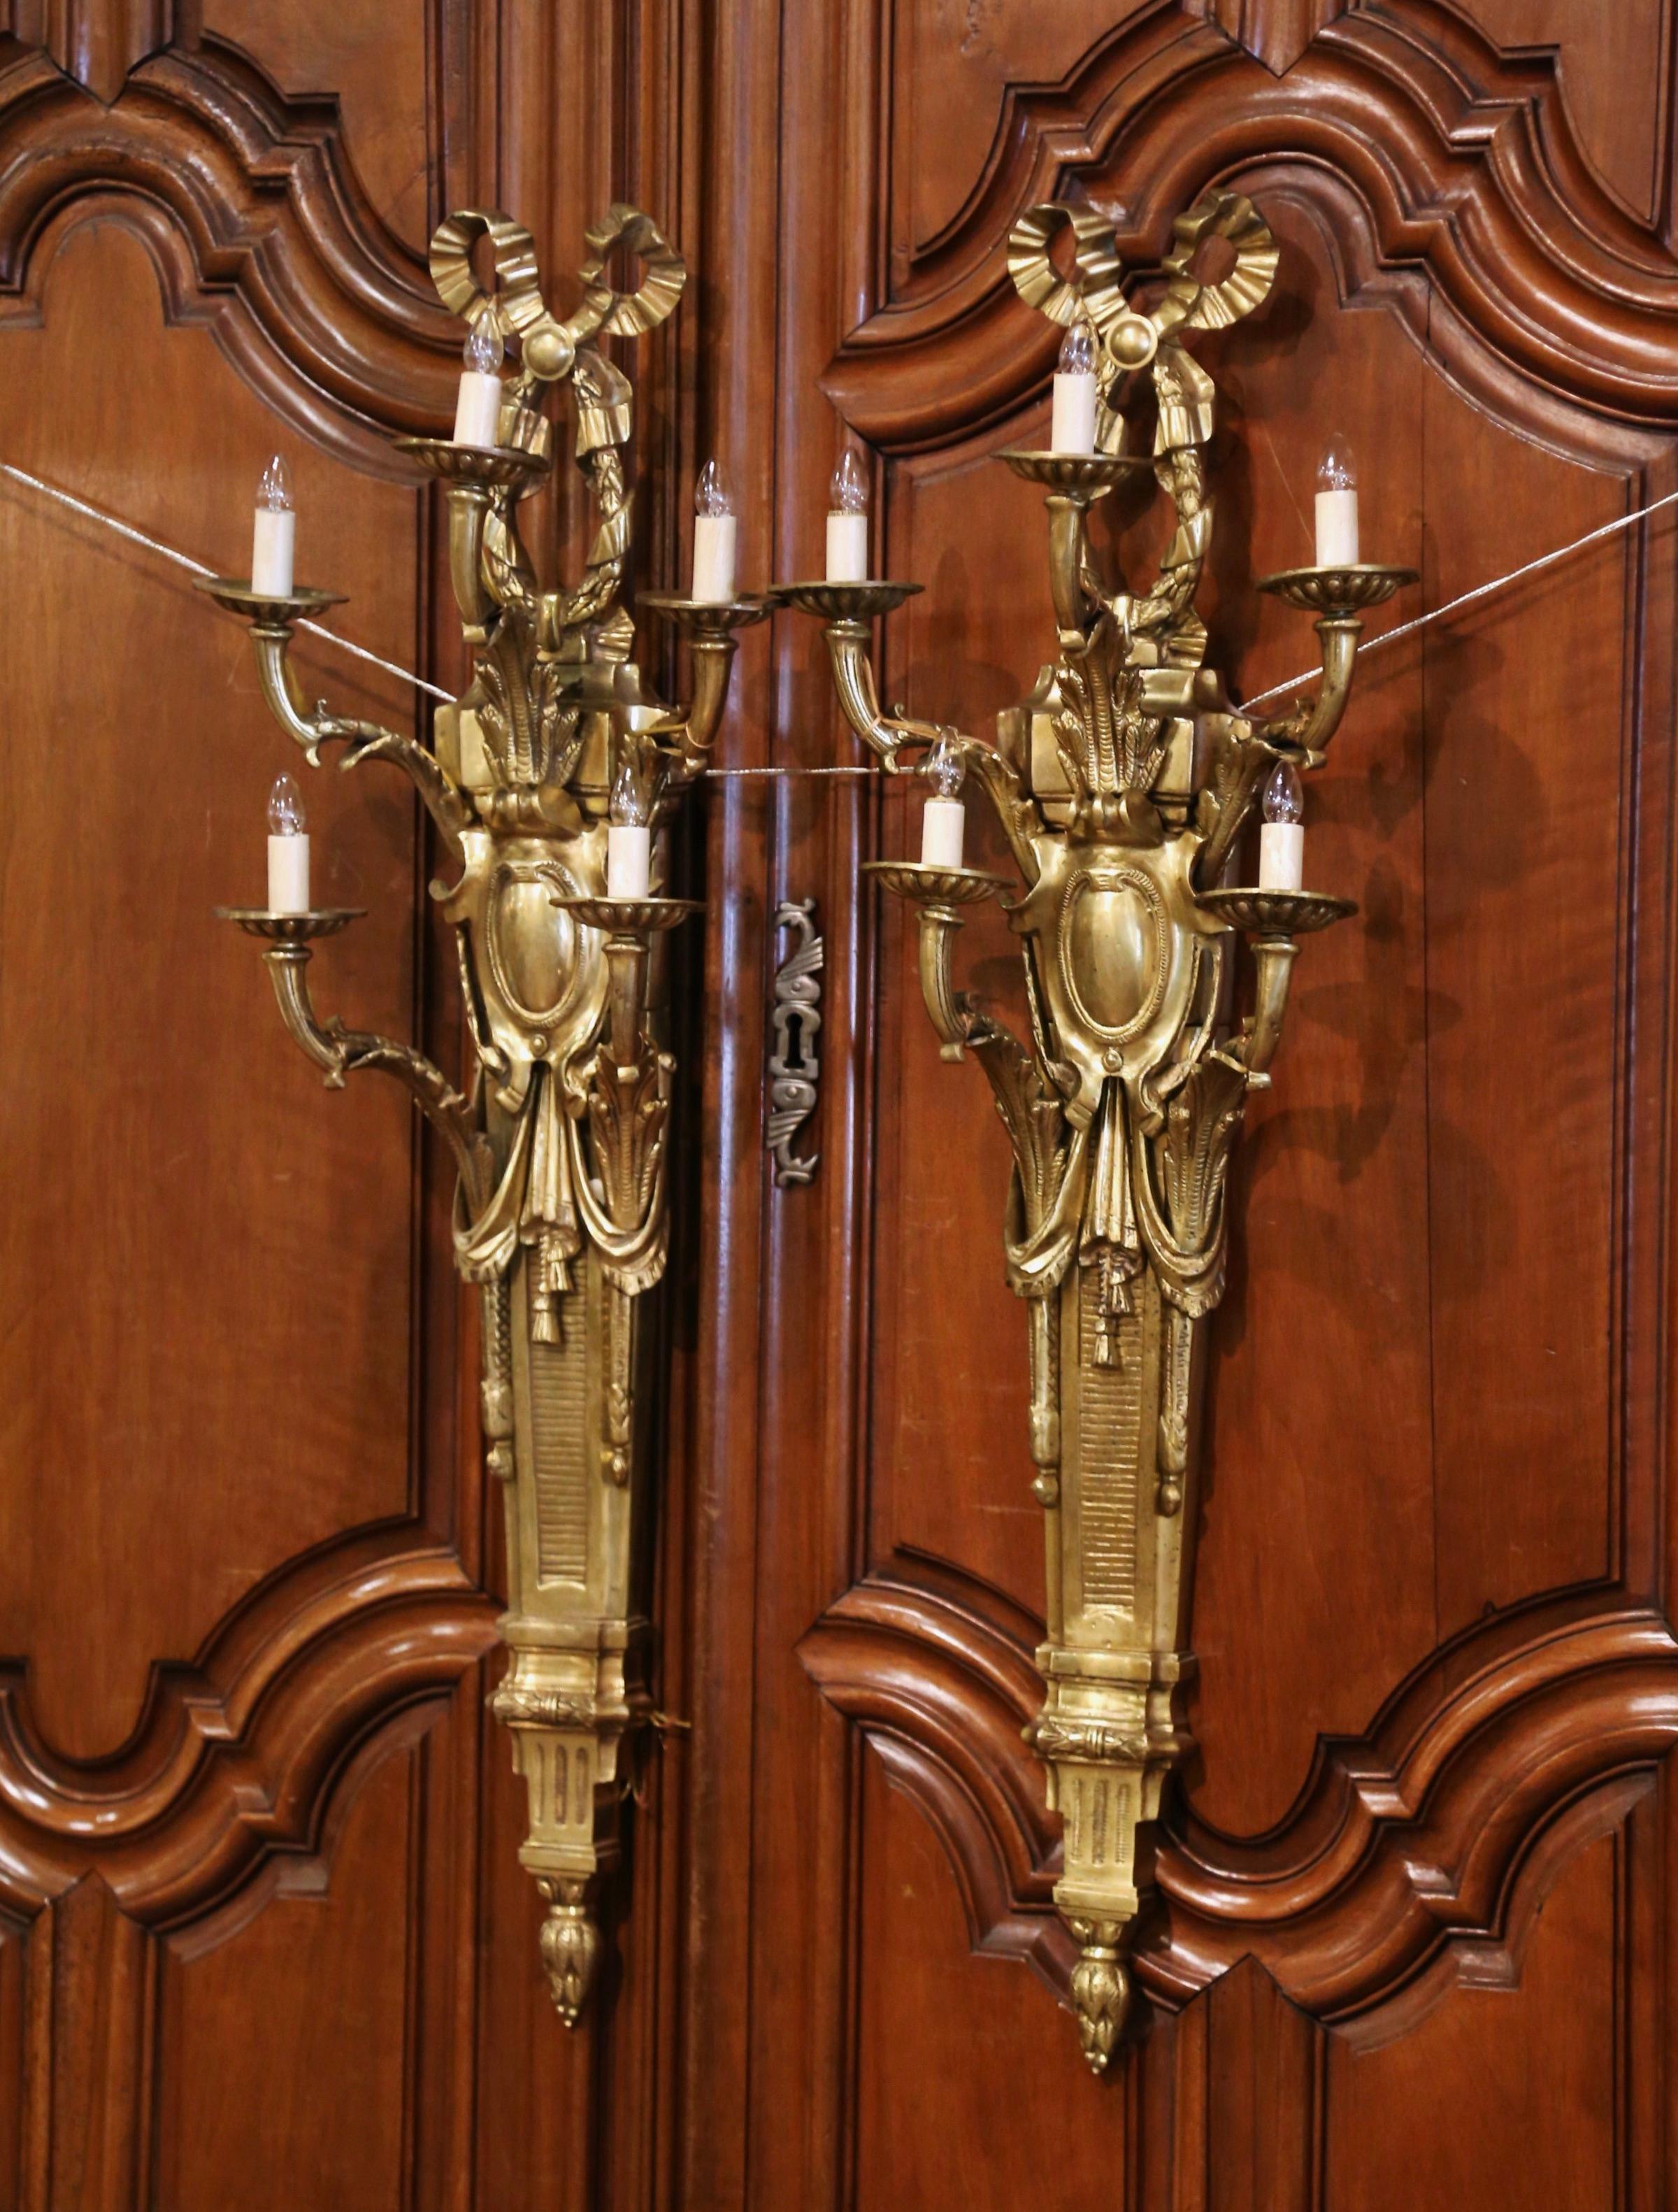 These large and elegant antique bronze sconces were crafted in France, circa 1960. Each wall sconce has five lights newly wired, and features a traditional Louis XVI ribbon bow at the pediment, with acanthus leaves, garland and swag motifs